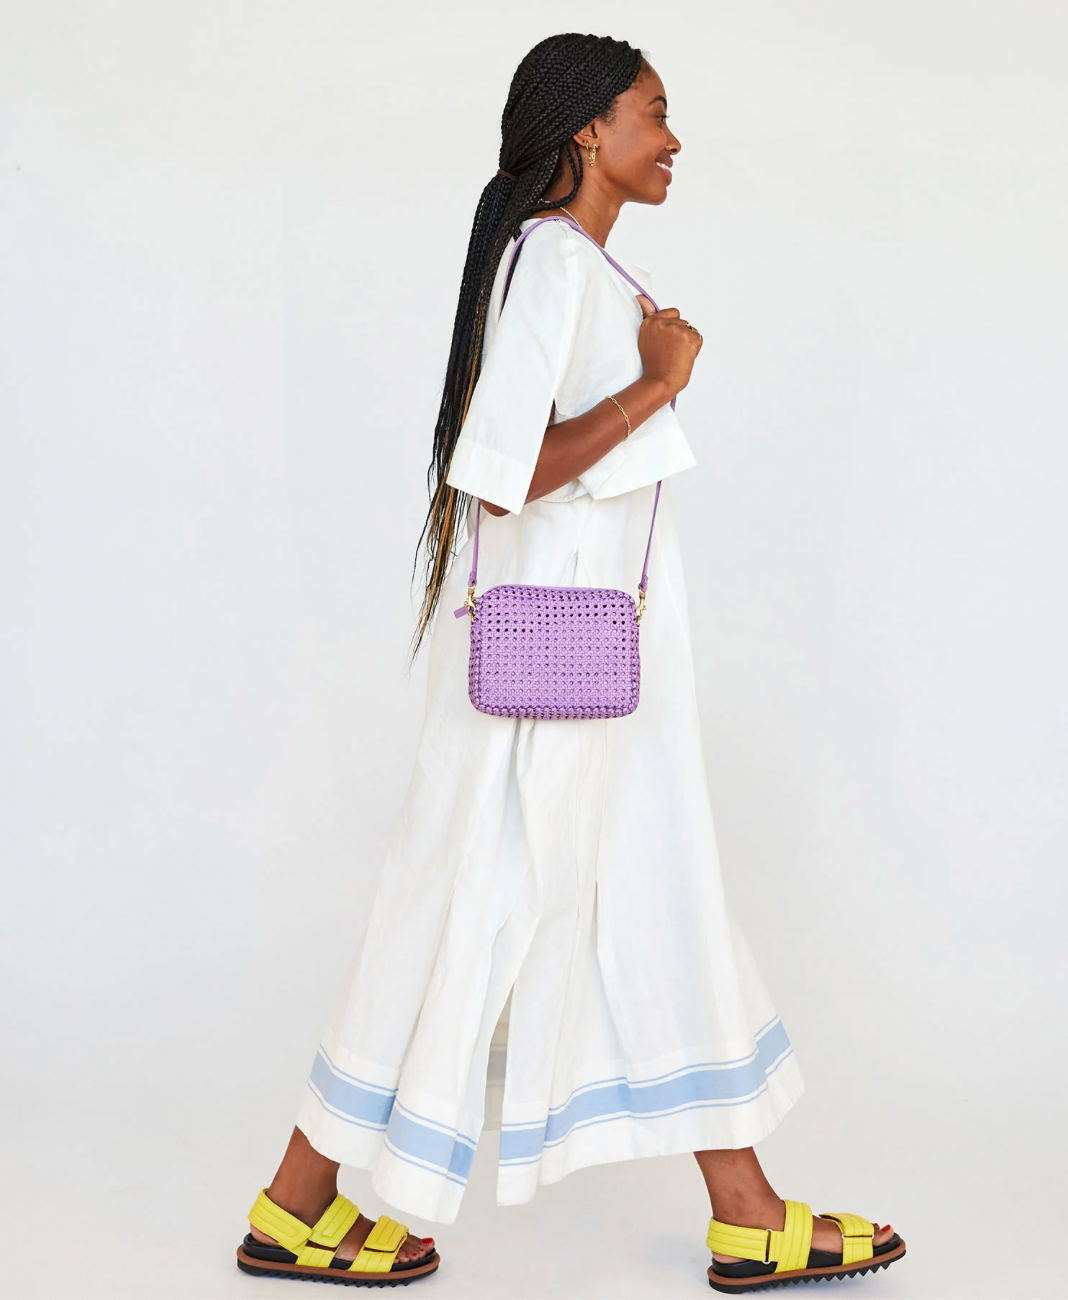 Clare V. Rattan Midi Sac in Lilac - Bliss Boutiques